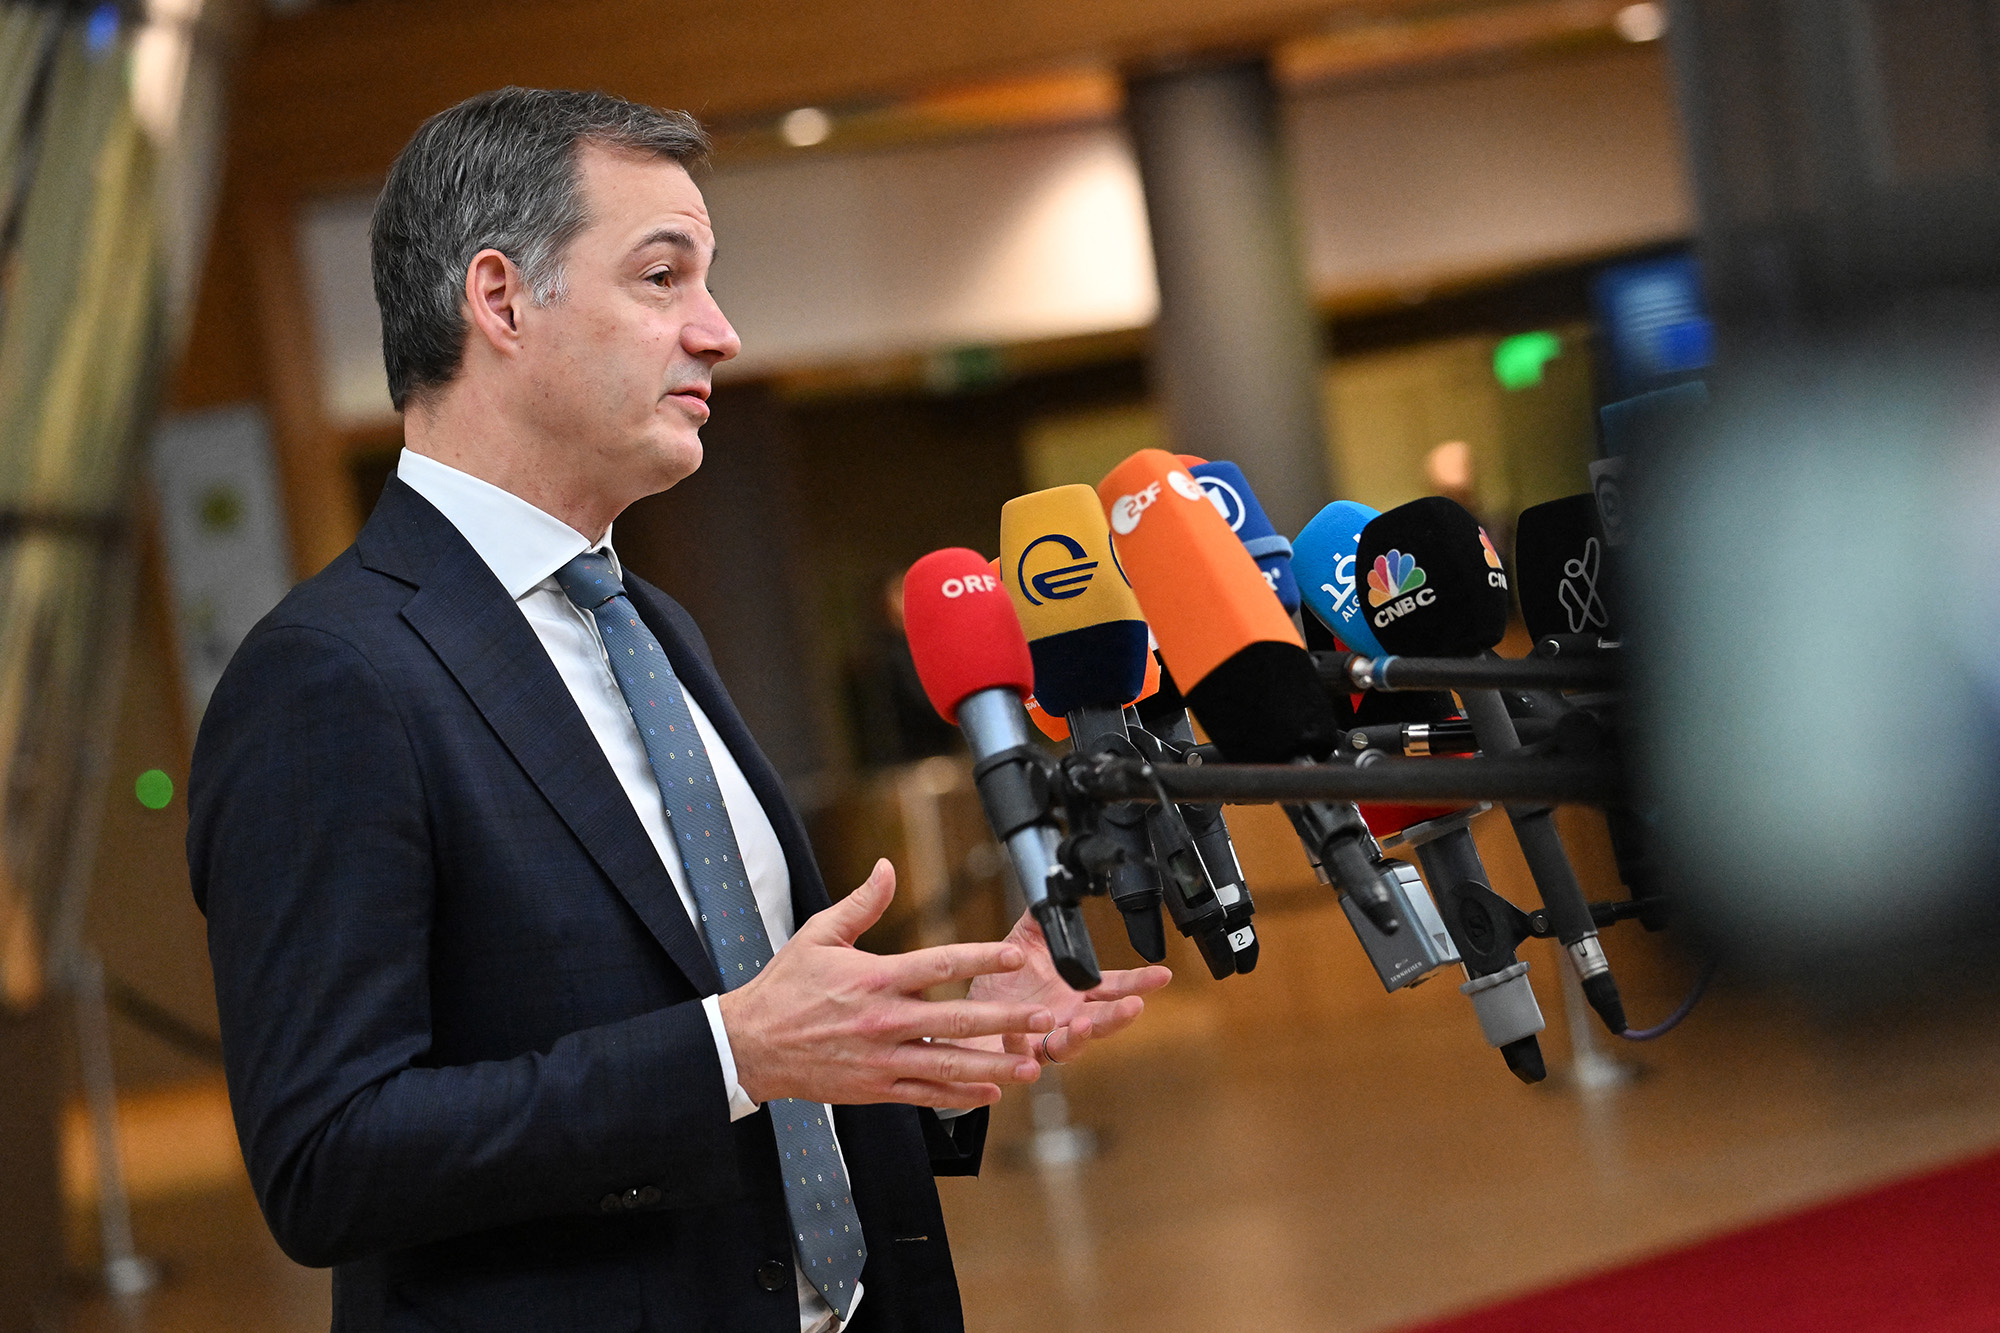 Belgium's Prime Minister, Alexander De Croo speaks to the press as he arrives at the European headquarters to attend the European Union summit, in Brussels, Belgium, on December 15.